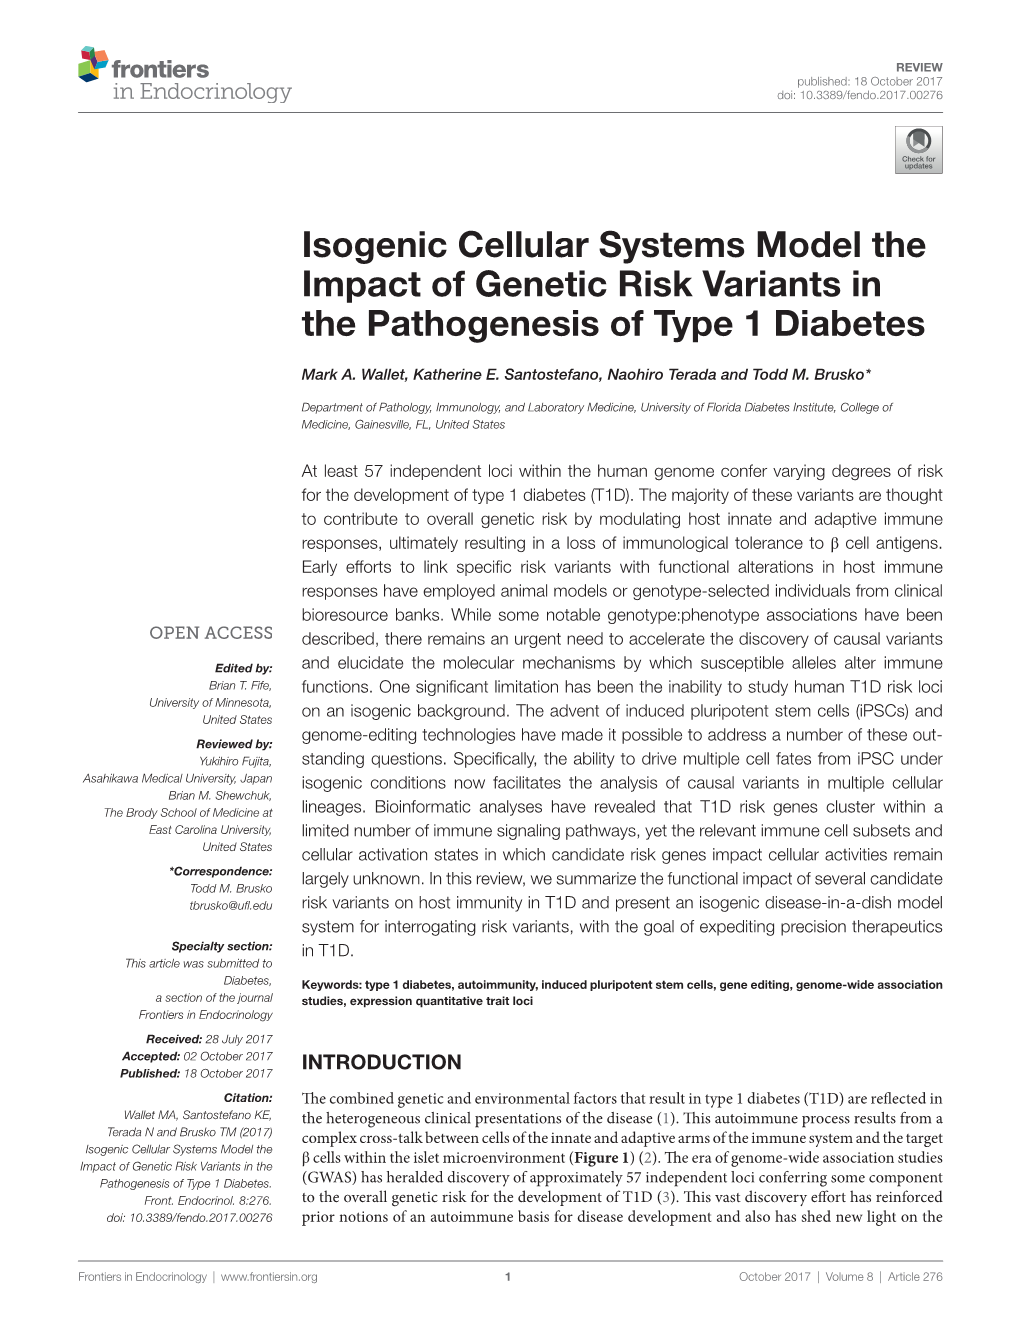 Isogenic Cellular Systems Model the Impact of Genetic Risk Variants in the Pathogenesis of Type 1 Diabetes